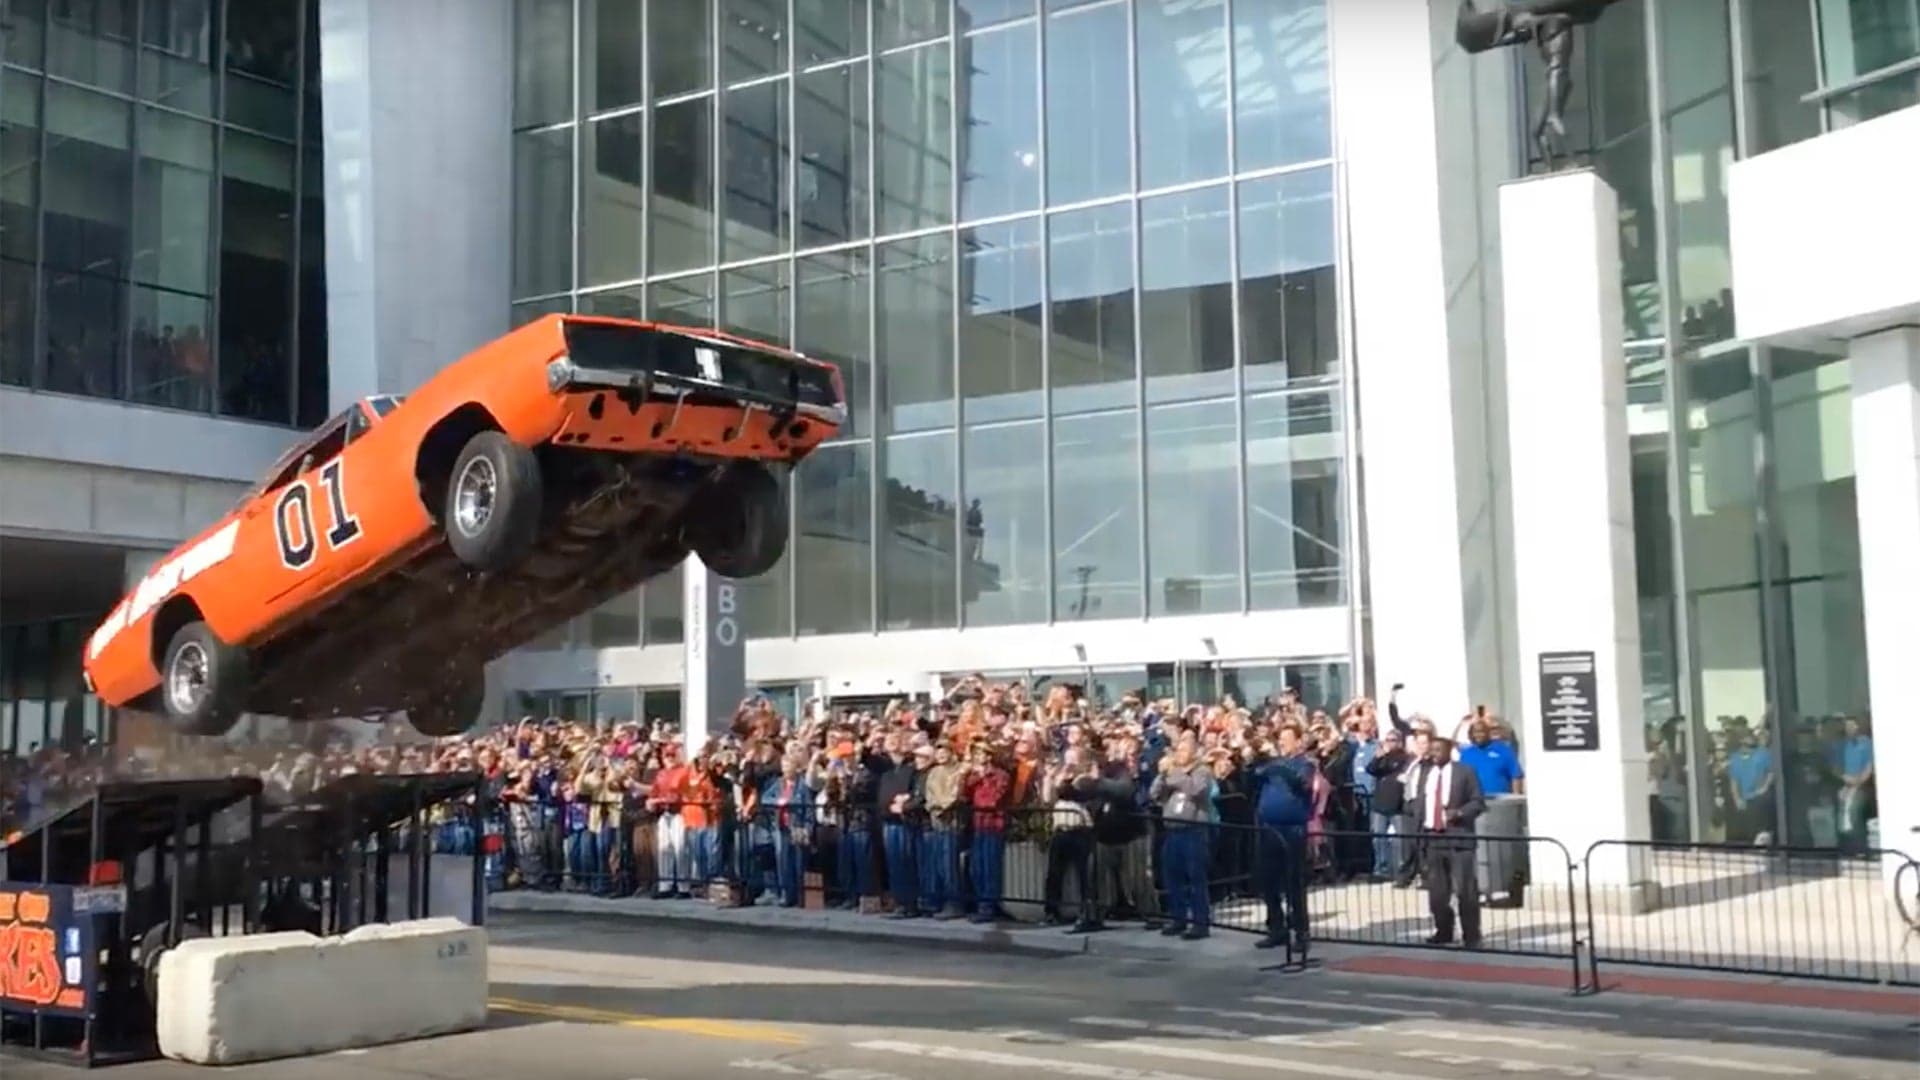 Epic Dukes of Hazzard General Lee Stunt in Detroit Ends, Predictably, in Awesome Crash